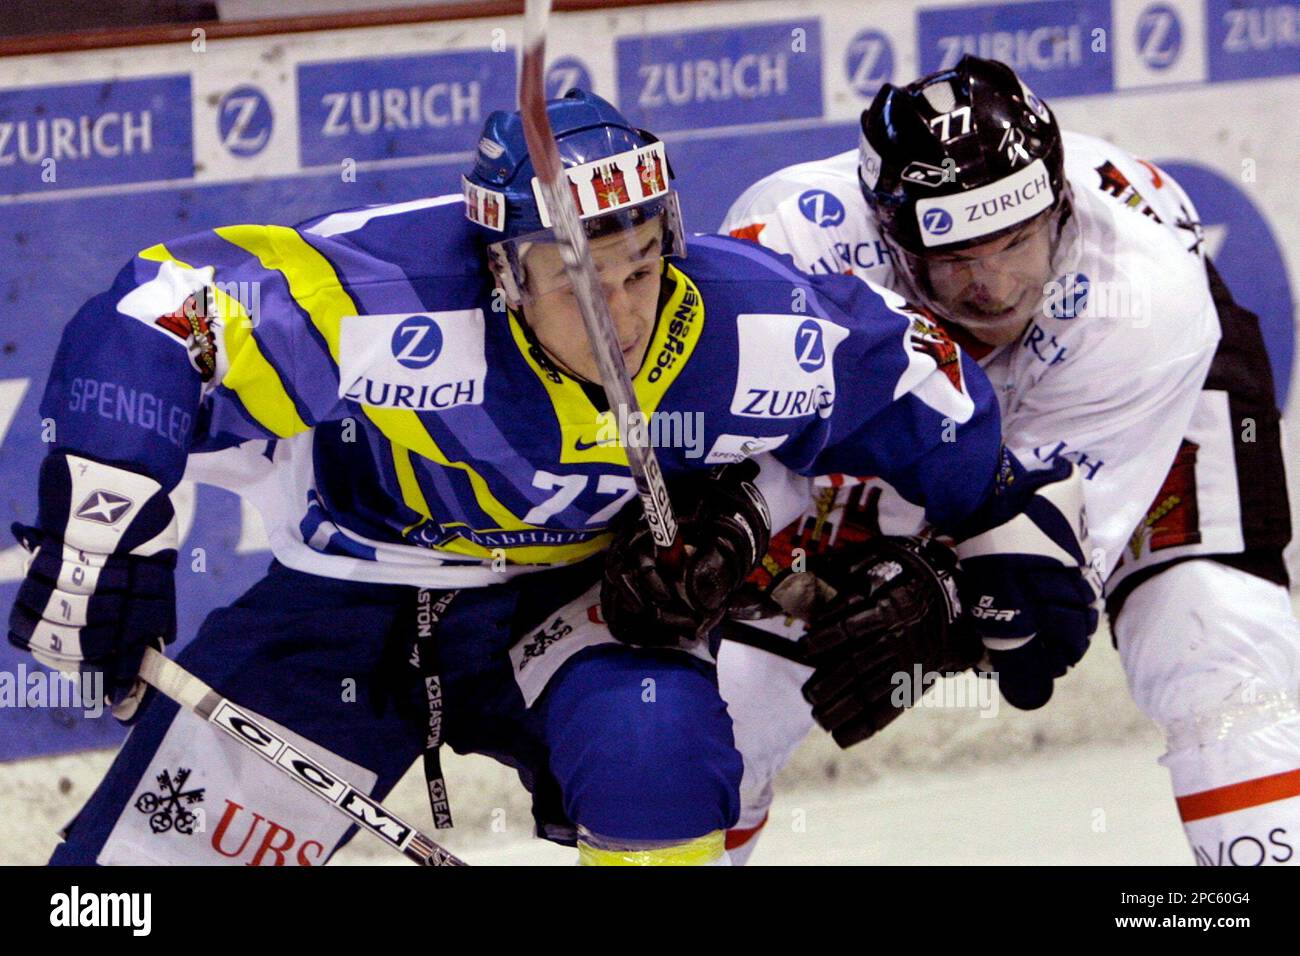 Russias Khimik player Maxim Semenov, left, fights for the puck with Swedens Mora IK player Martin Jansson, right, during the game Mora IK against Khimik at the 80th Spengler Cup ice hockey